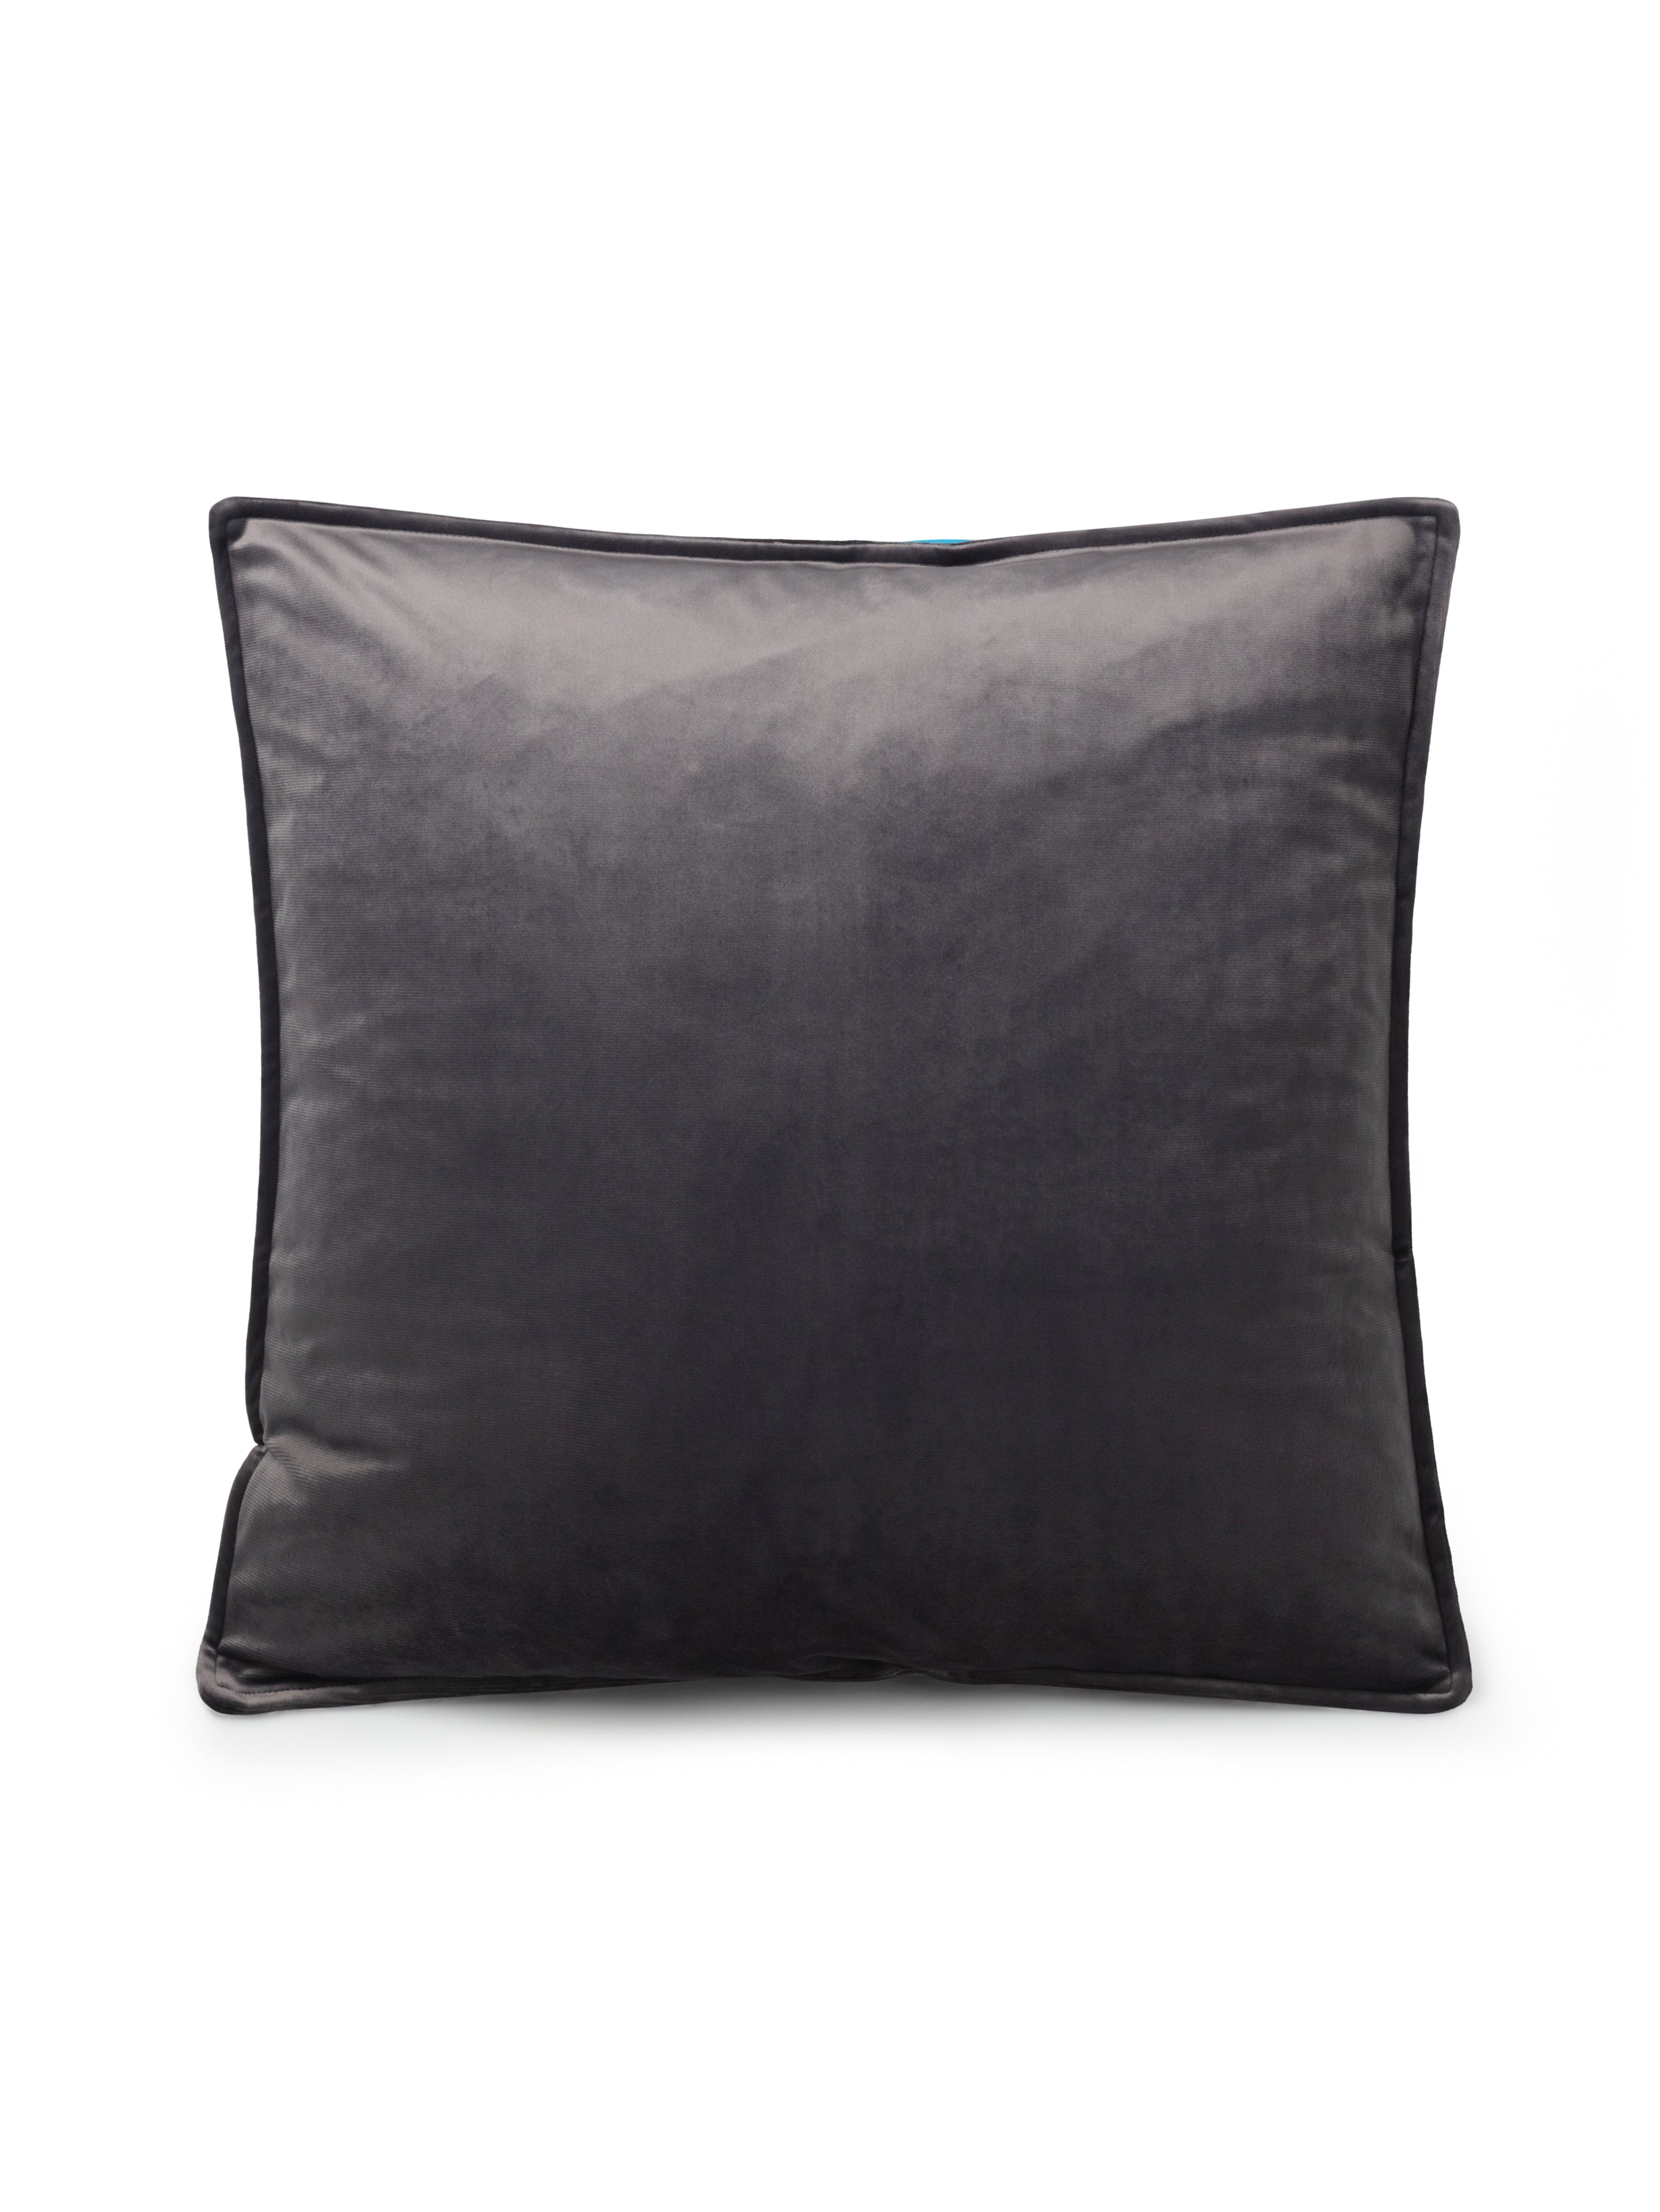 Charcoal velvet cushion with a feather insert by Chalk, adding elegance and comfort to your living space.